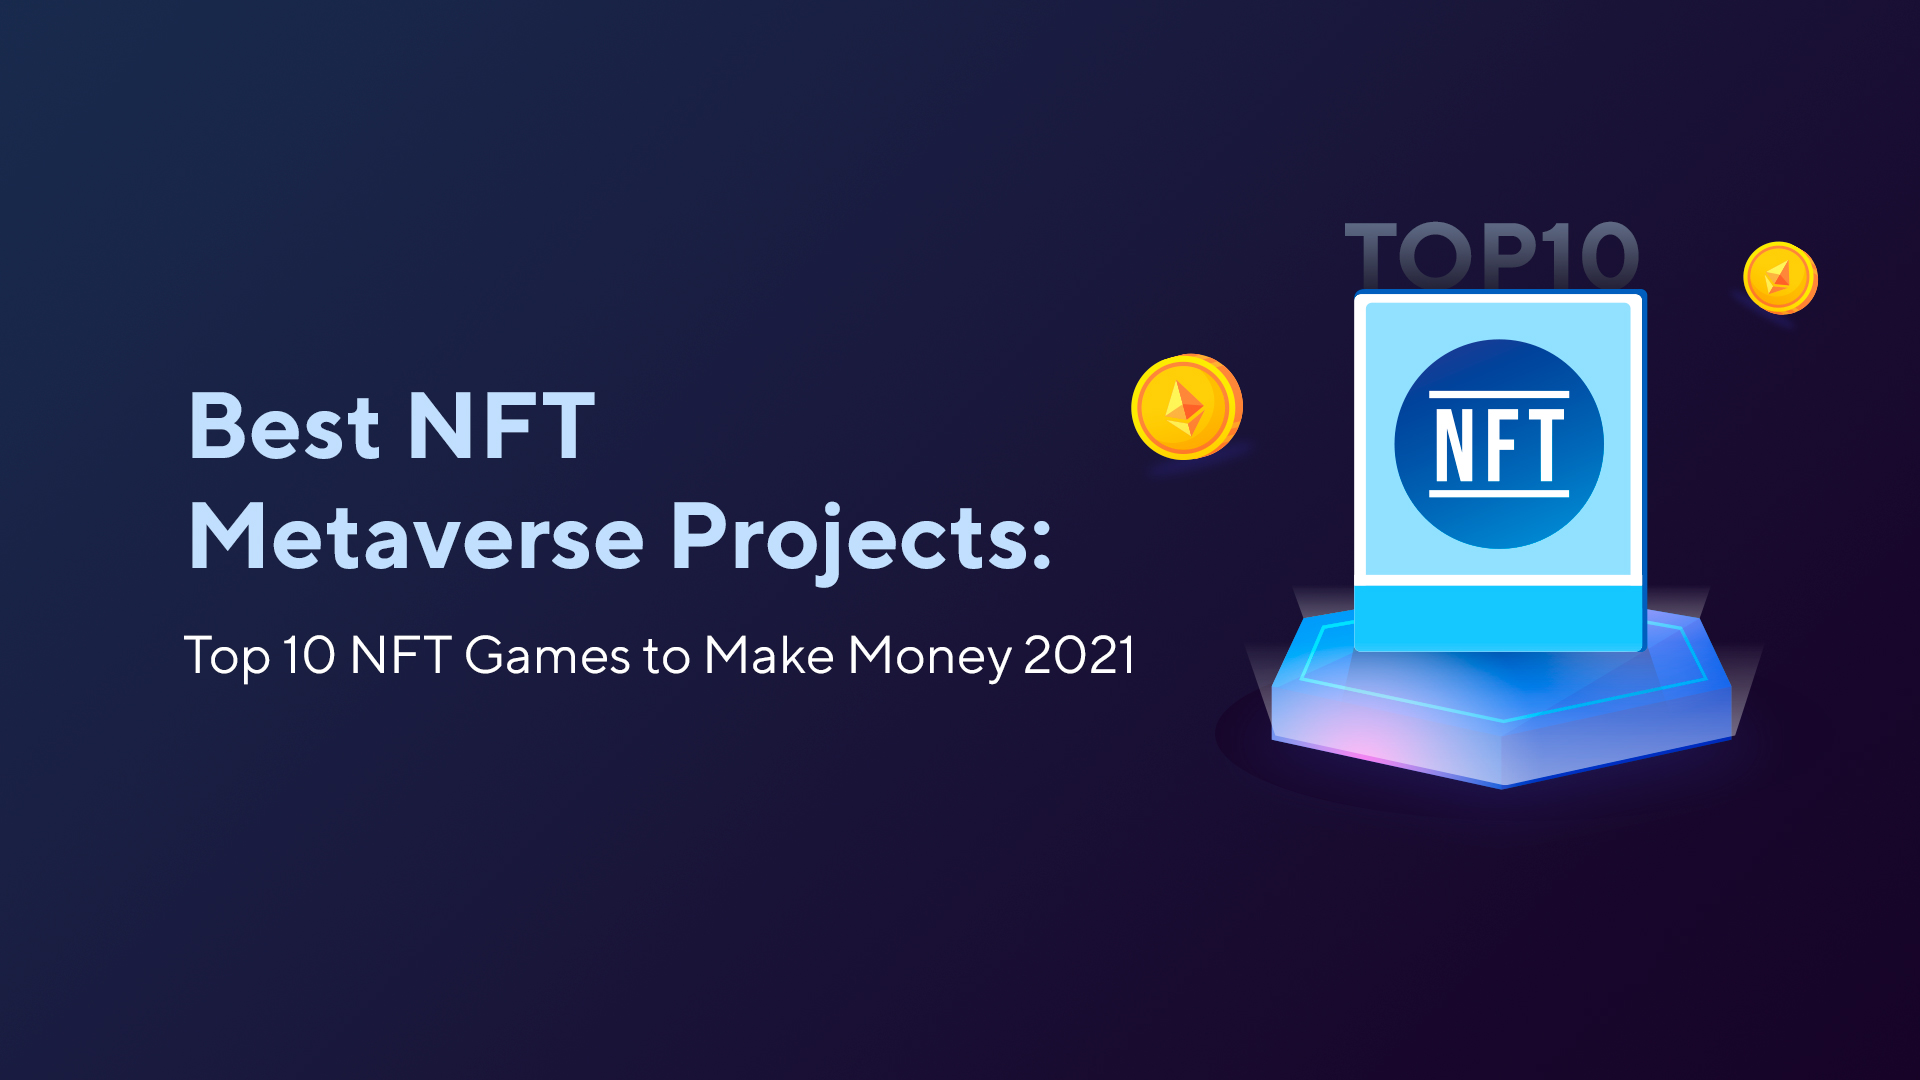 Best NFT Metaverse Projects: Top 10 NFT Games to Make Money 2021